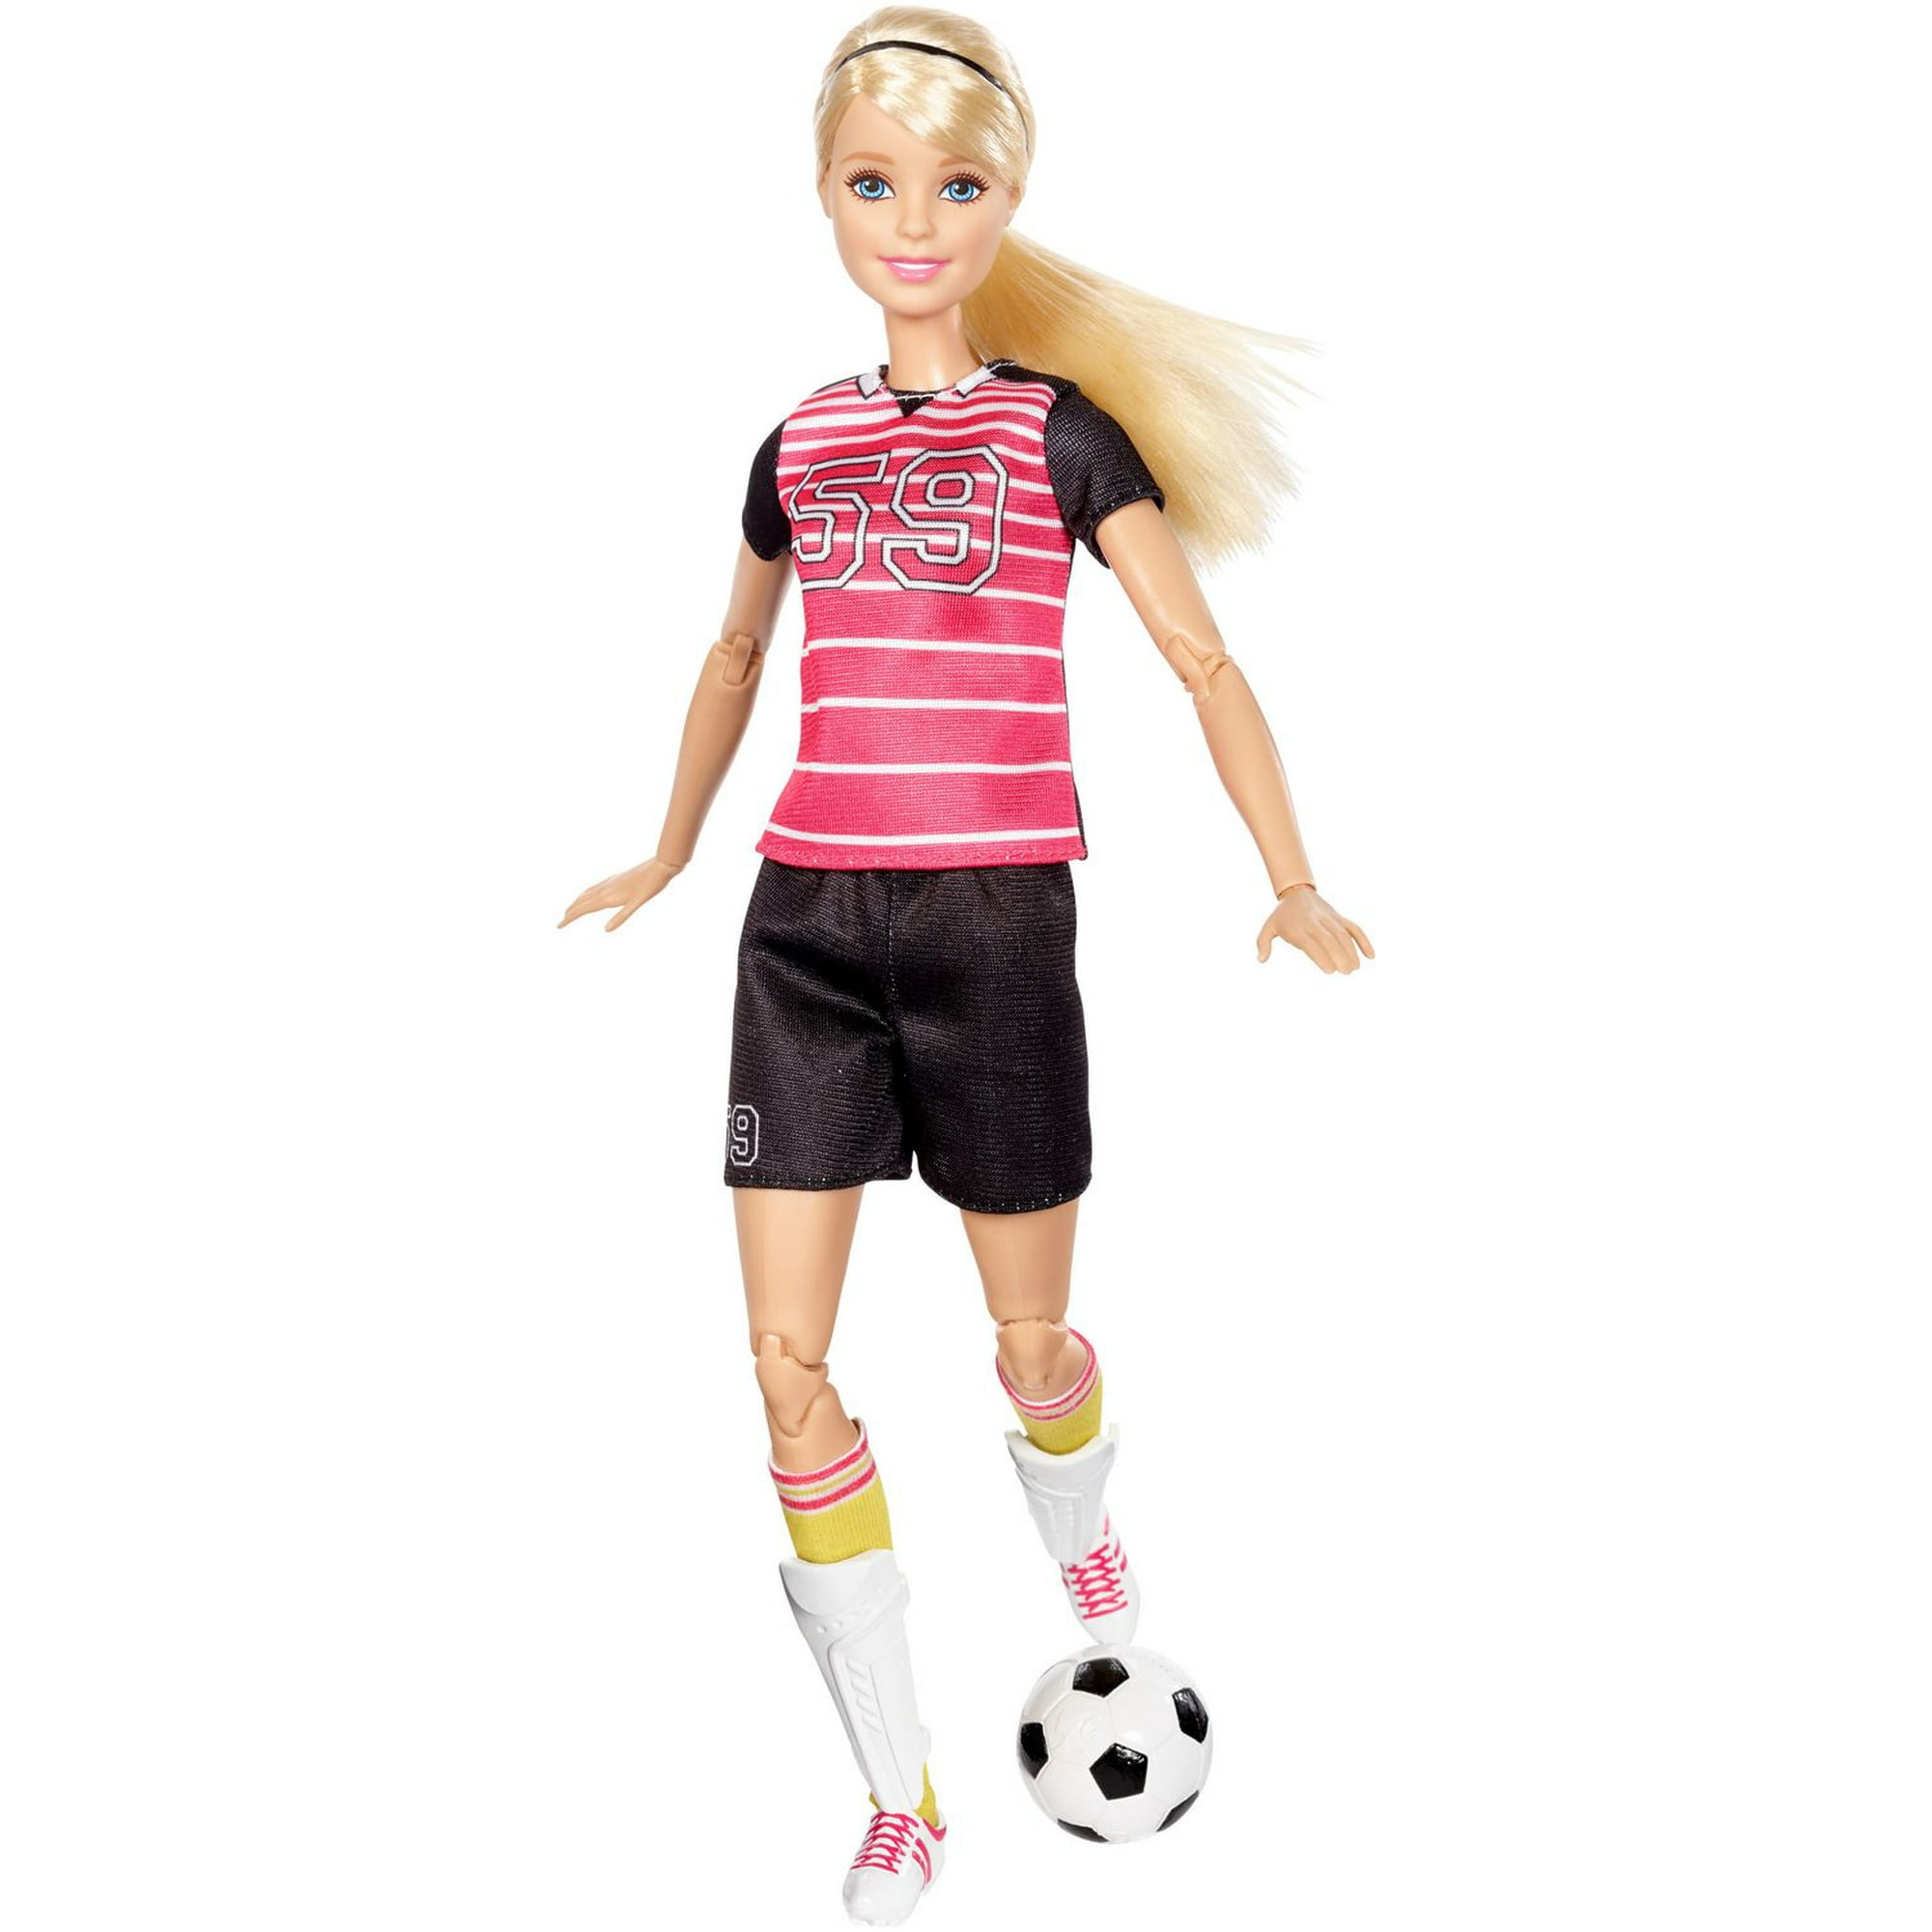 Barbie Made to Move Barbie Doll, Pink Top and Made to Move Barbie Doll,  Purple Top, Dolls -  Canada